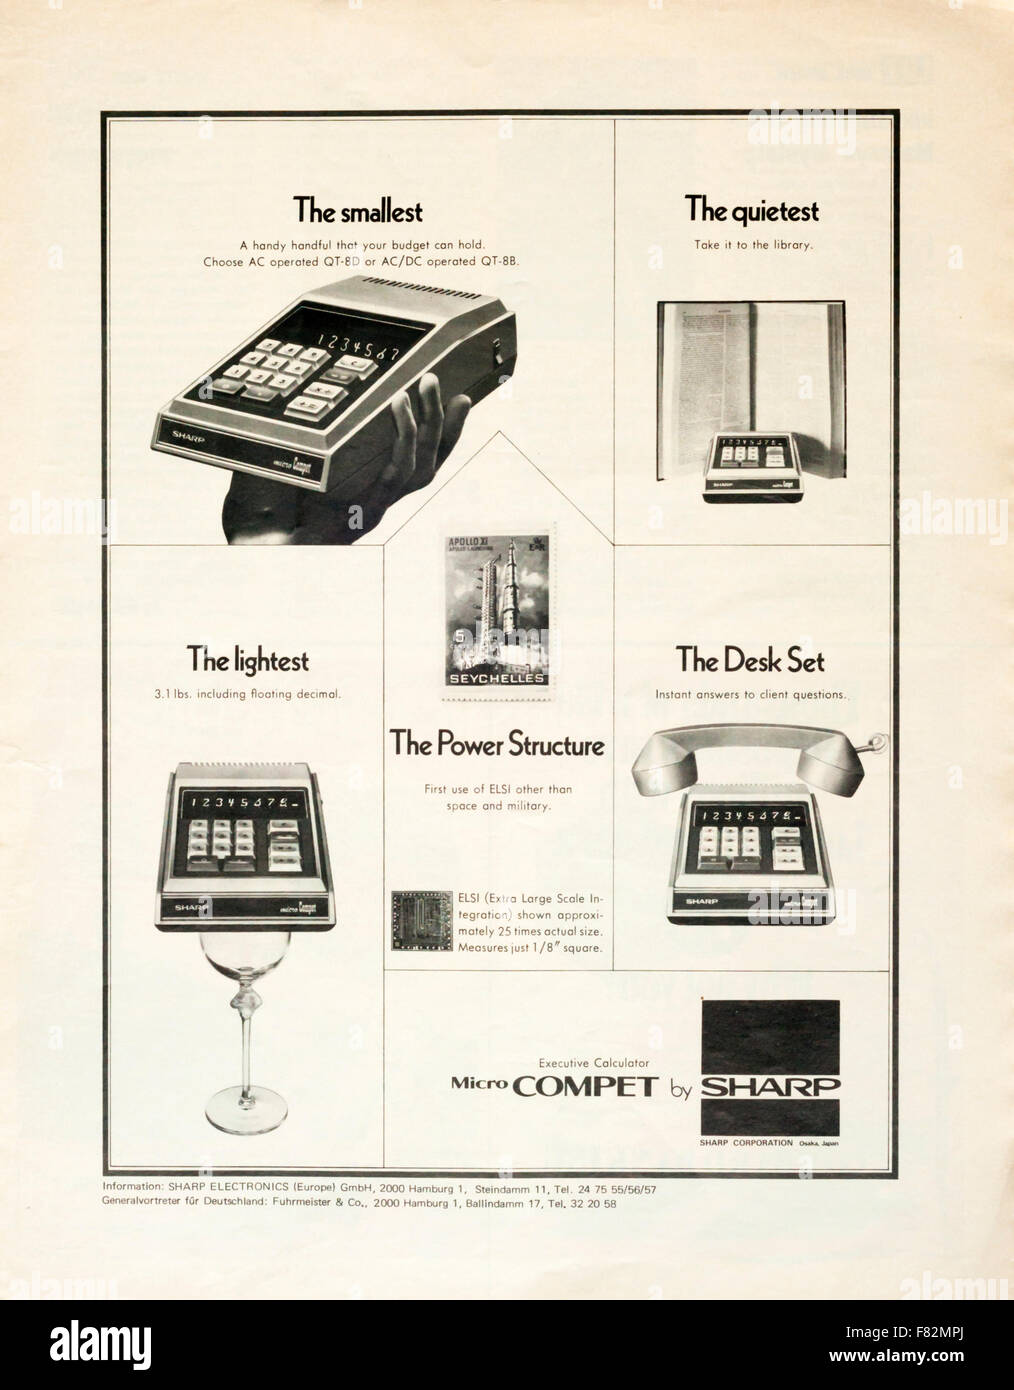 1970s magazine advertisement advertising the Micro Compet Executive calculator by Sharp. Stock Photo